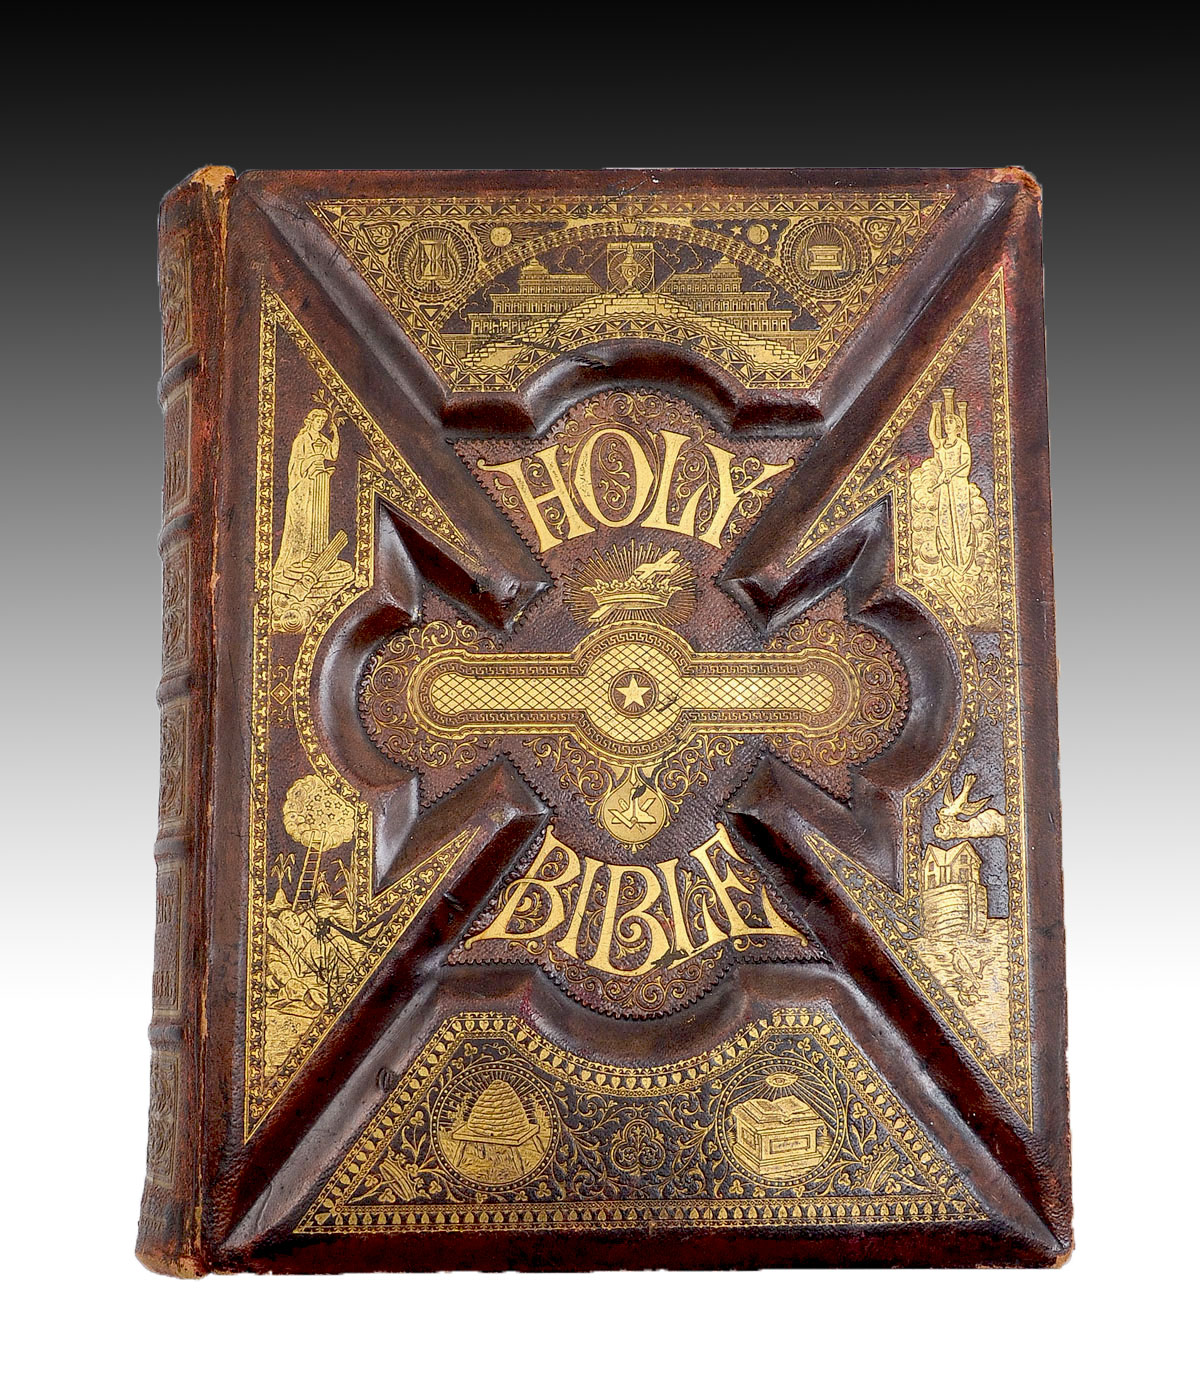 1887 PARALLEL ANTIQUE EMBOSSED BIBLE: